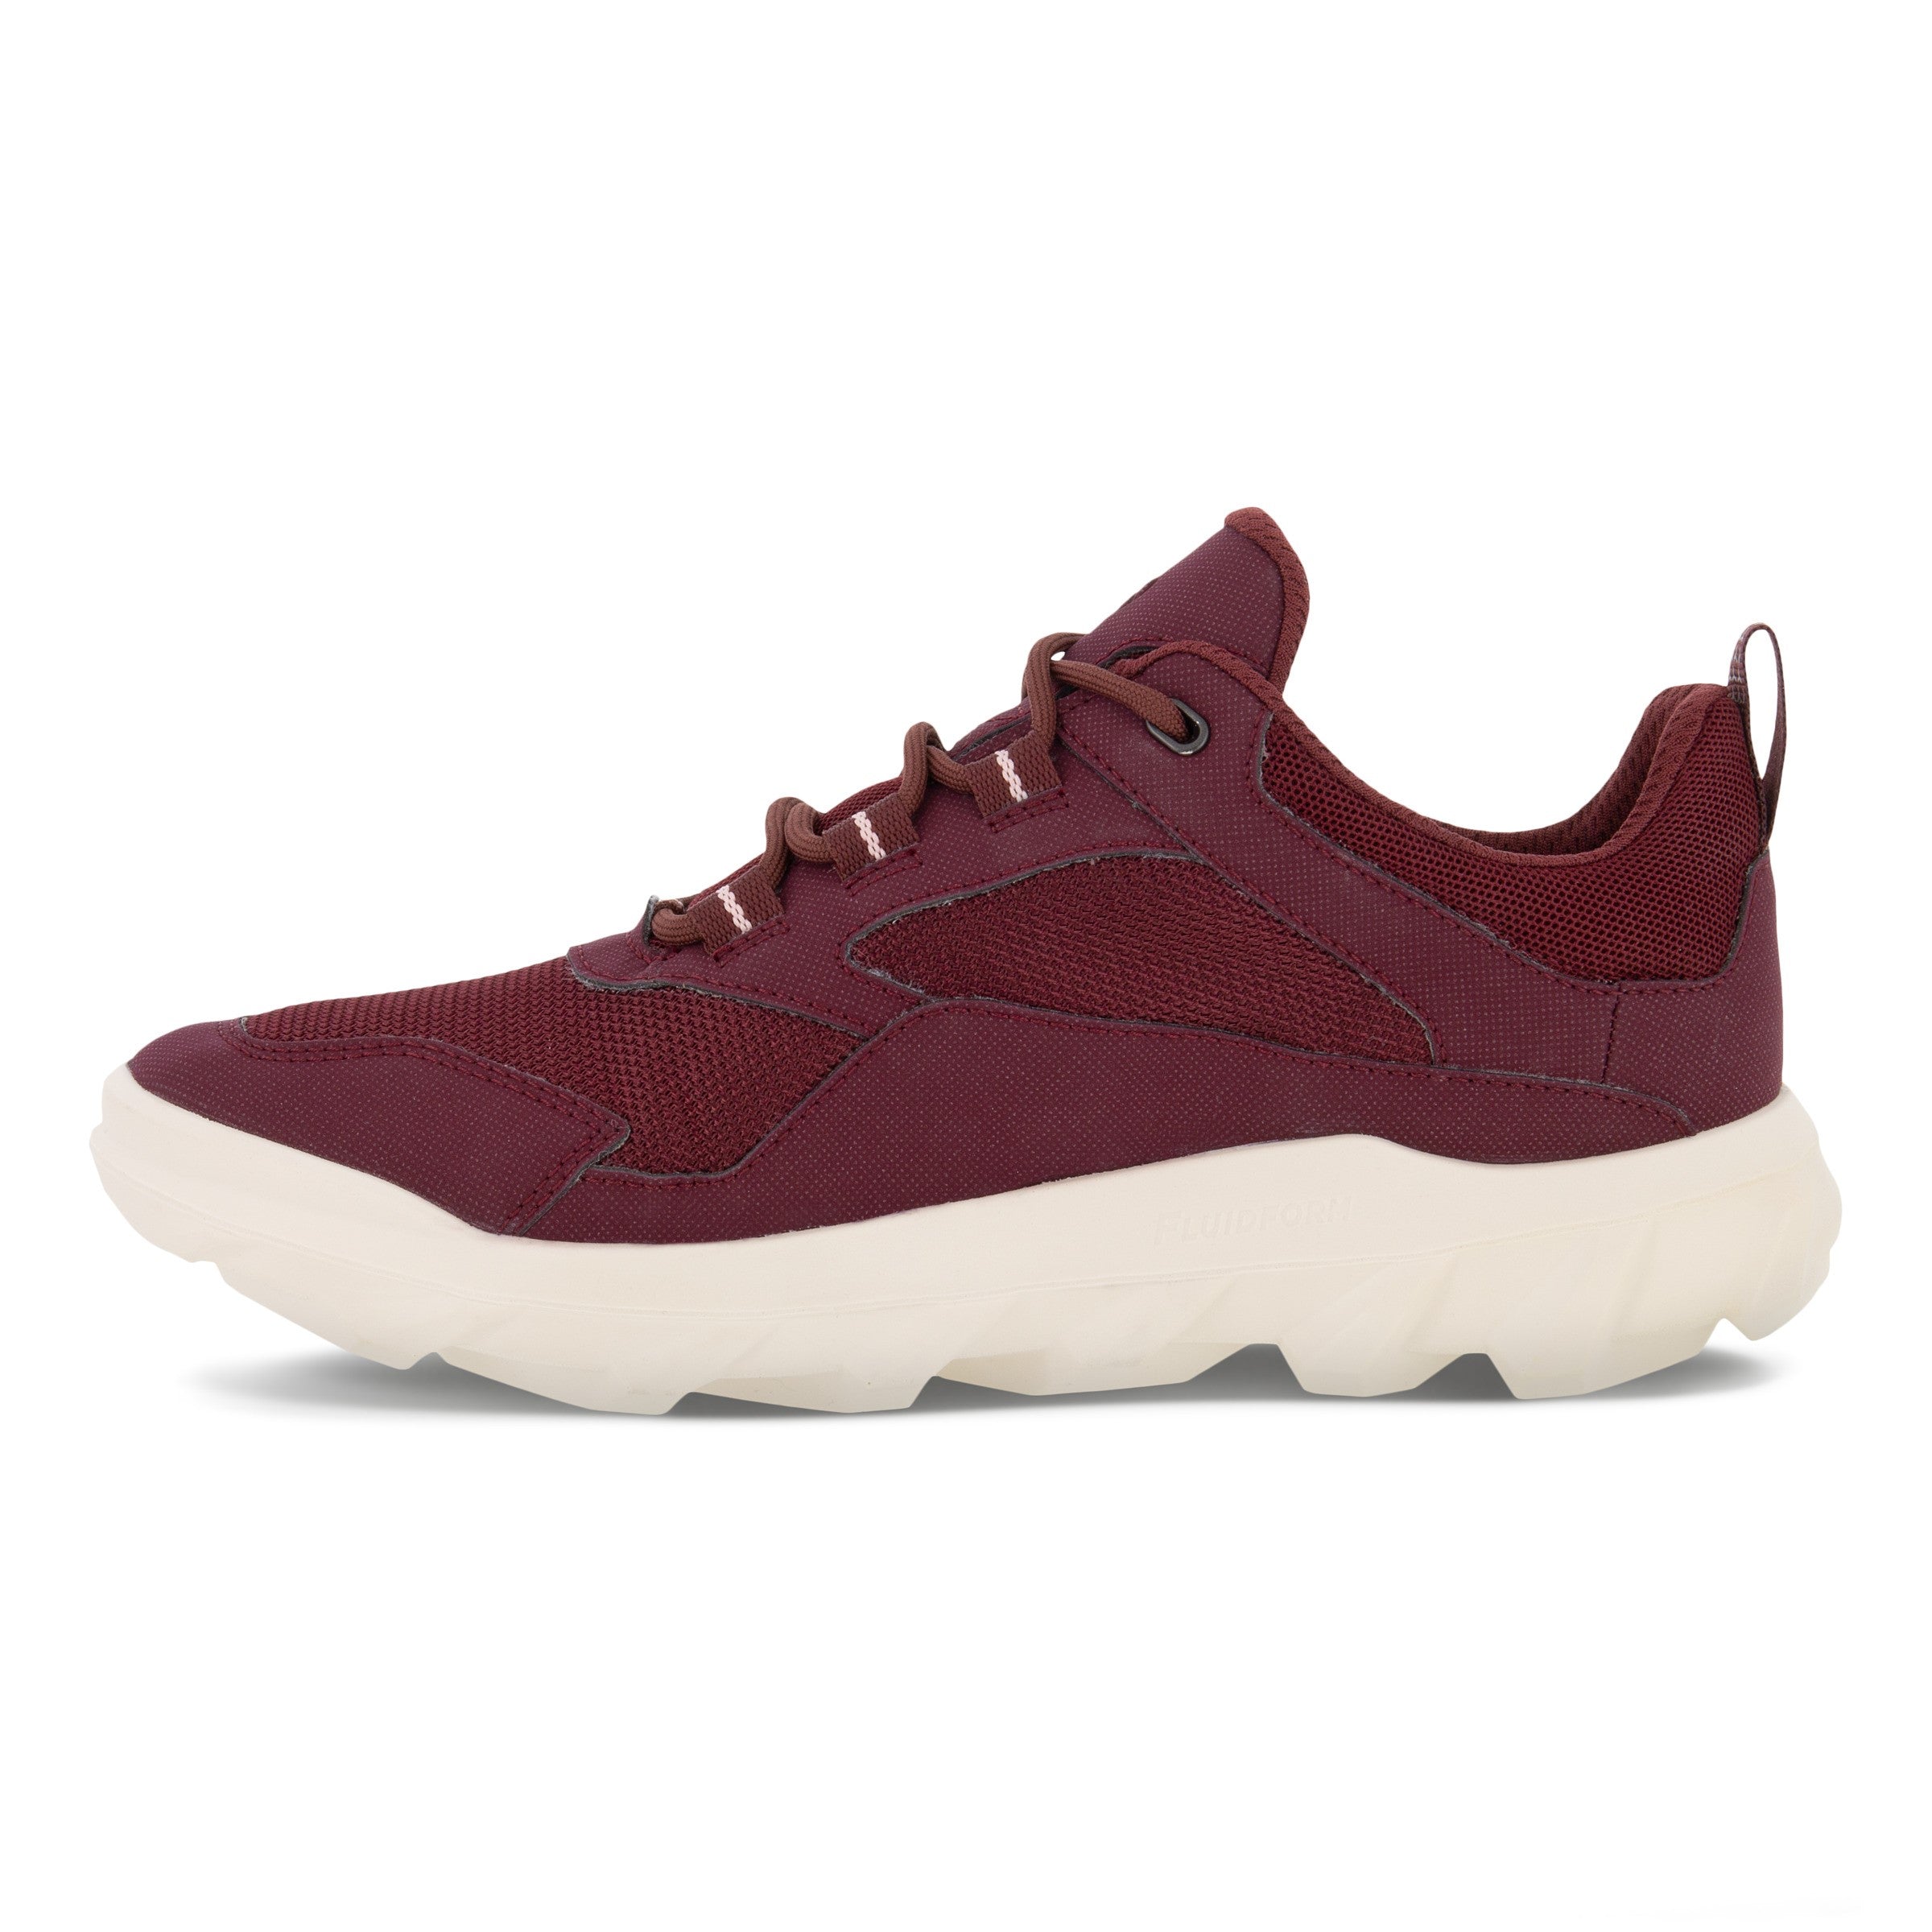 Ecco MX W Low GTX 820193 59223 Ladies Morillo Red Textile Waterproof Arch Support Lace Up Trainers